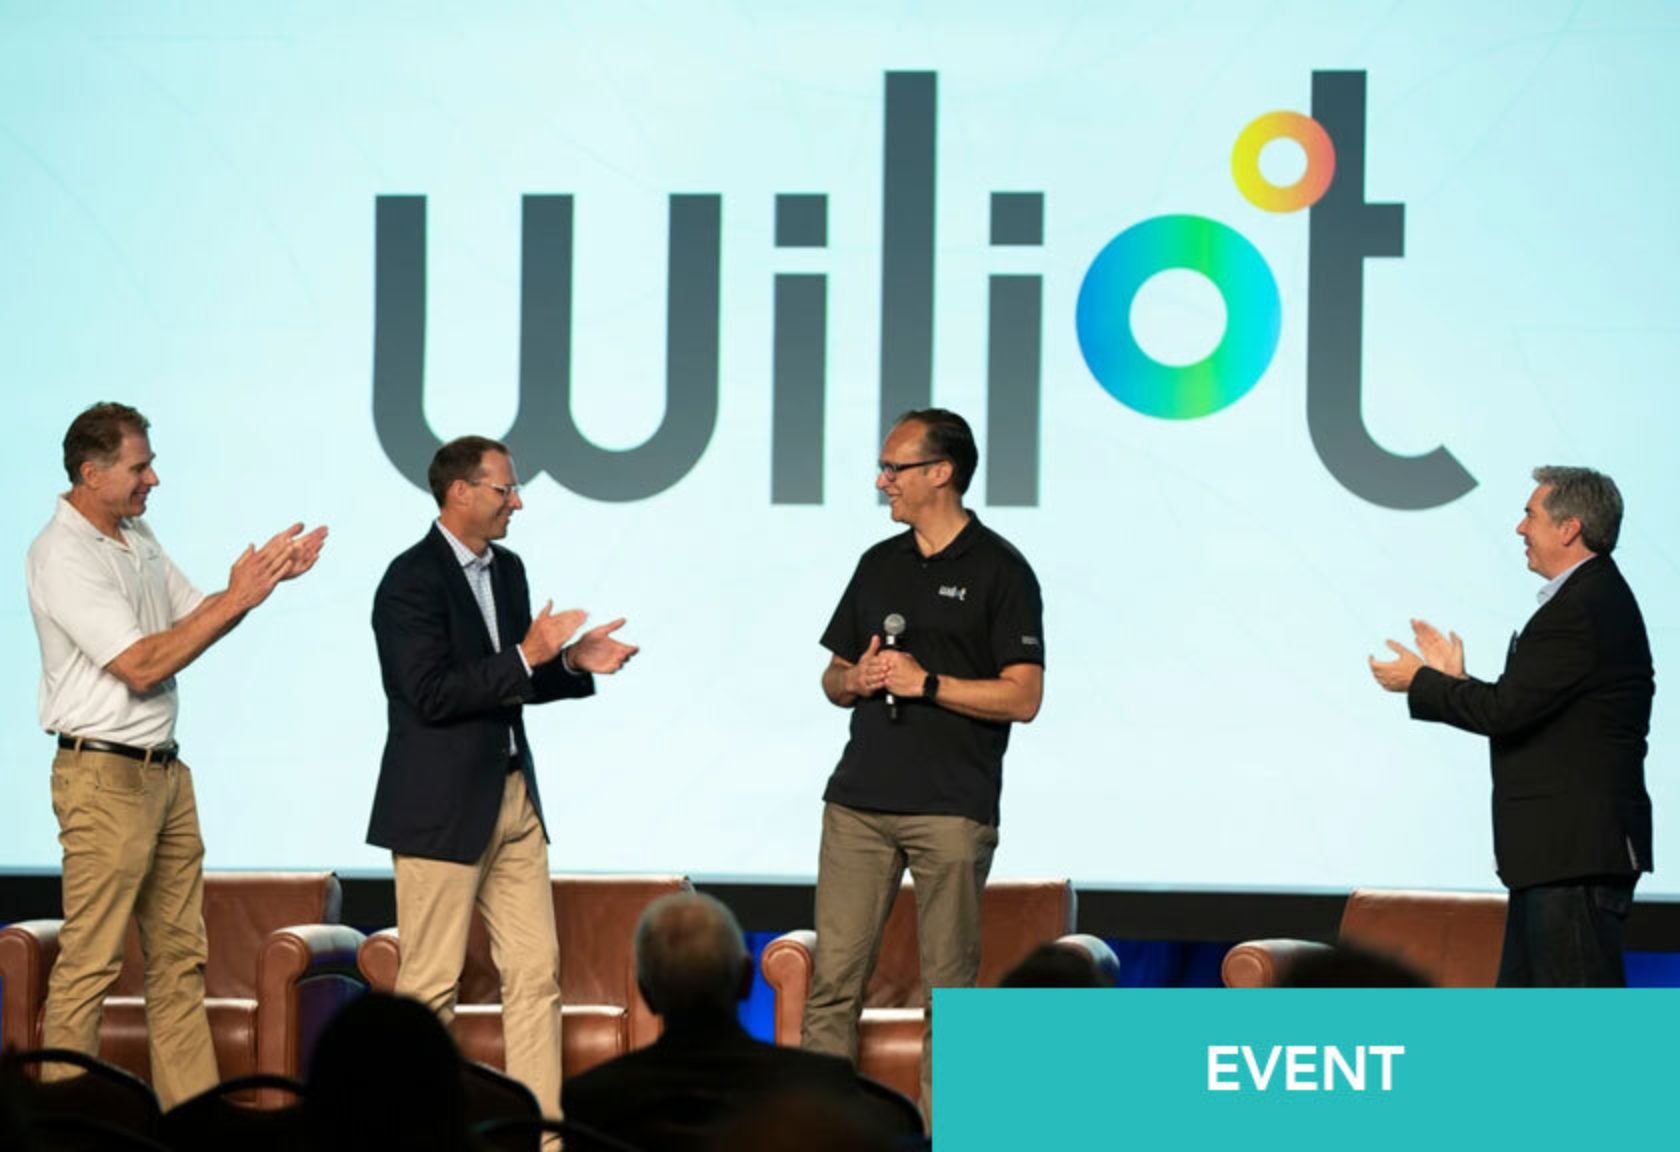 Wiliot Voted "Best Innovation" at CableLabs Innovation Showcase